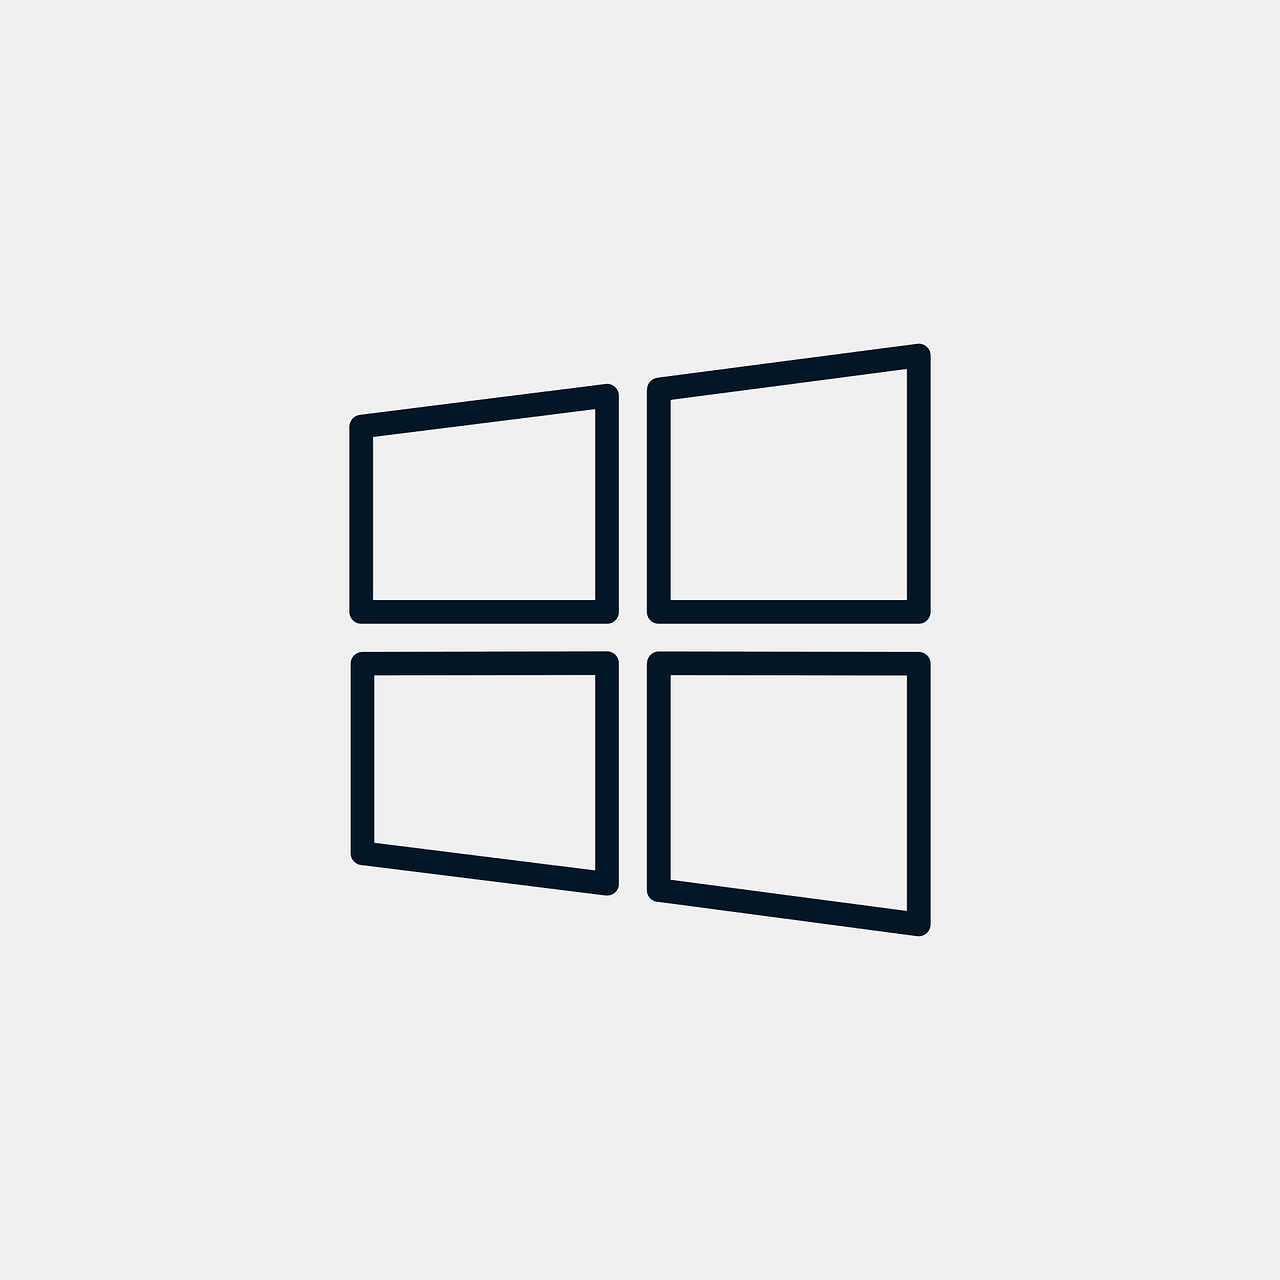 the windows logo is shown on a white background, a screenshot, unsplash, de stijl, flat icon, high definition screen capture, corporate phone app icon, framed 4 k